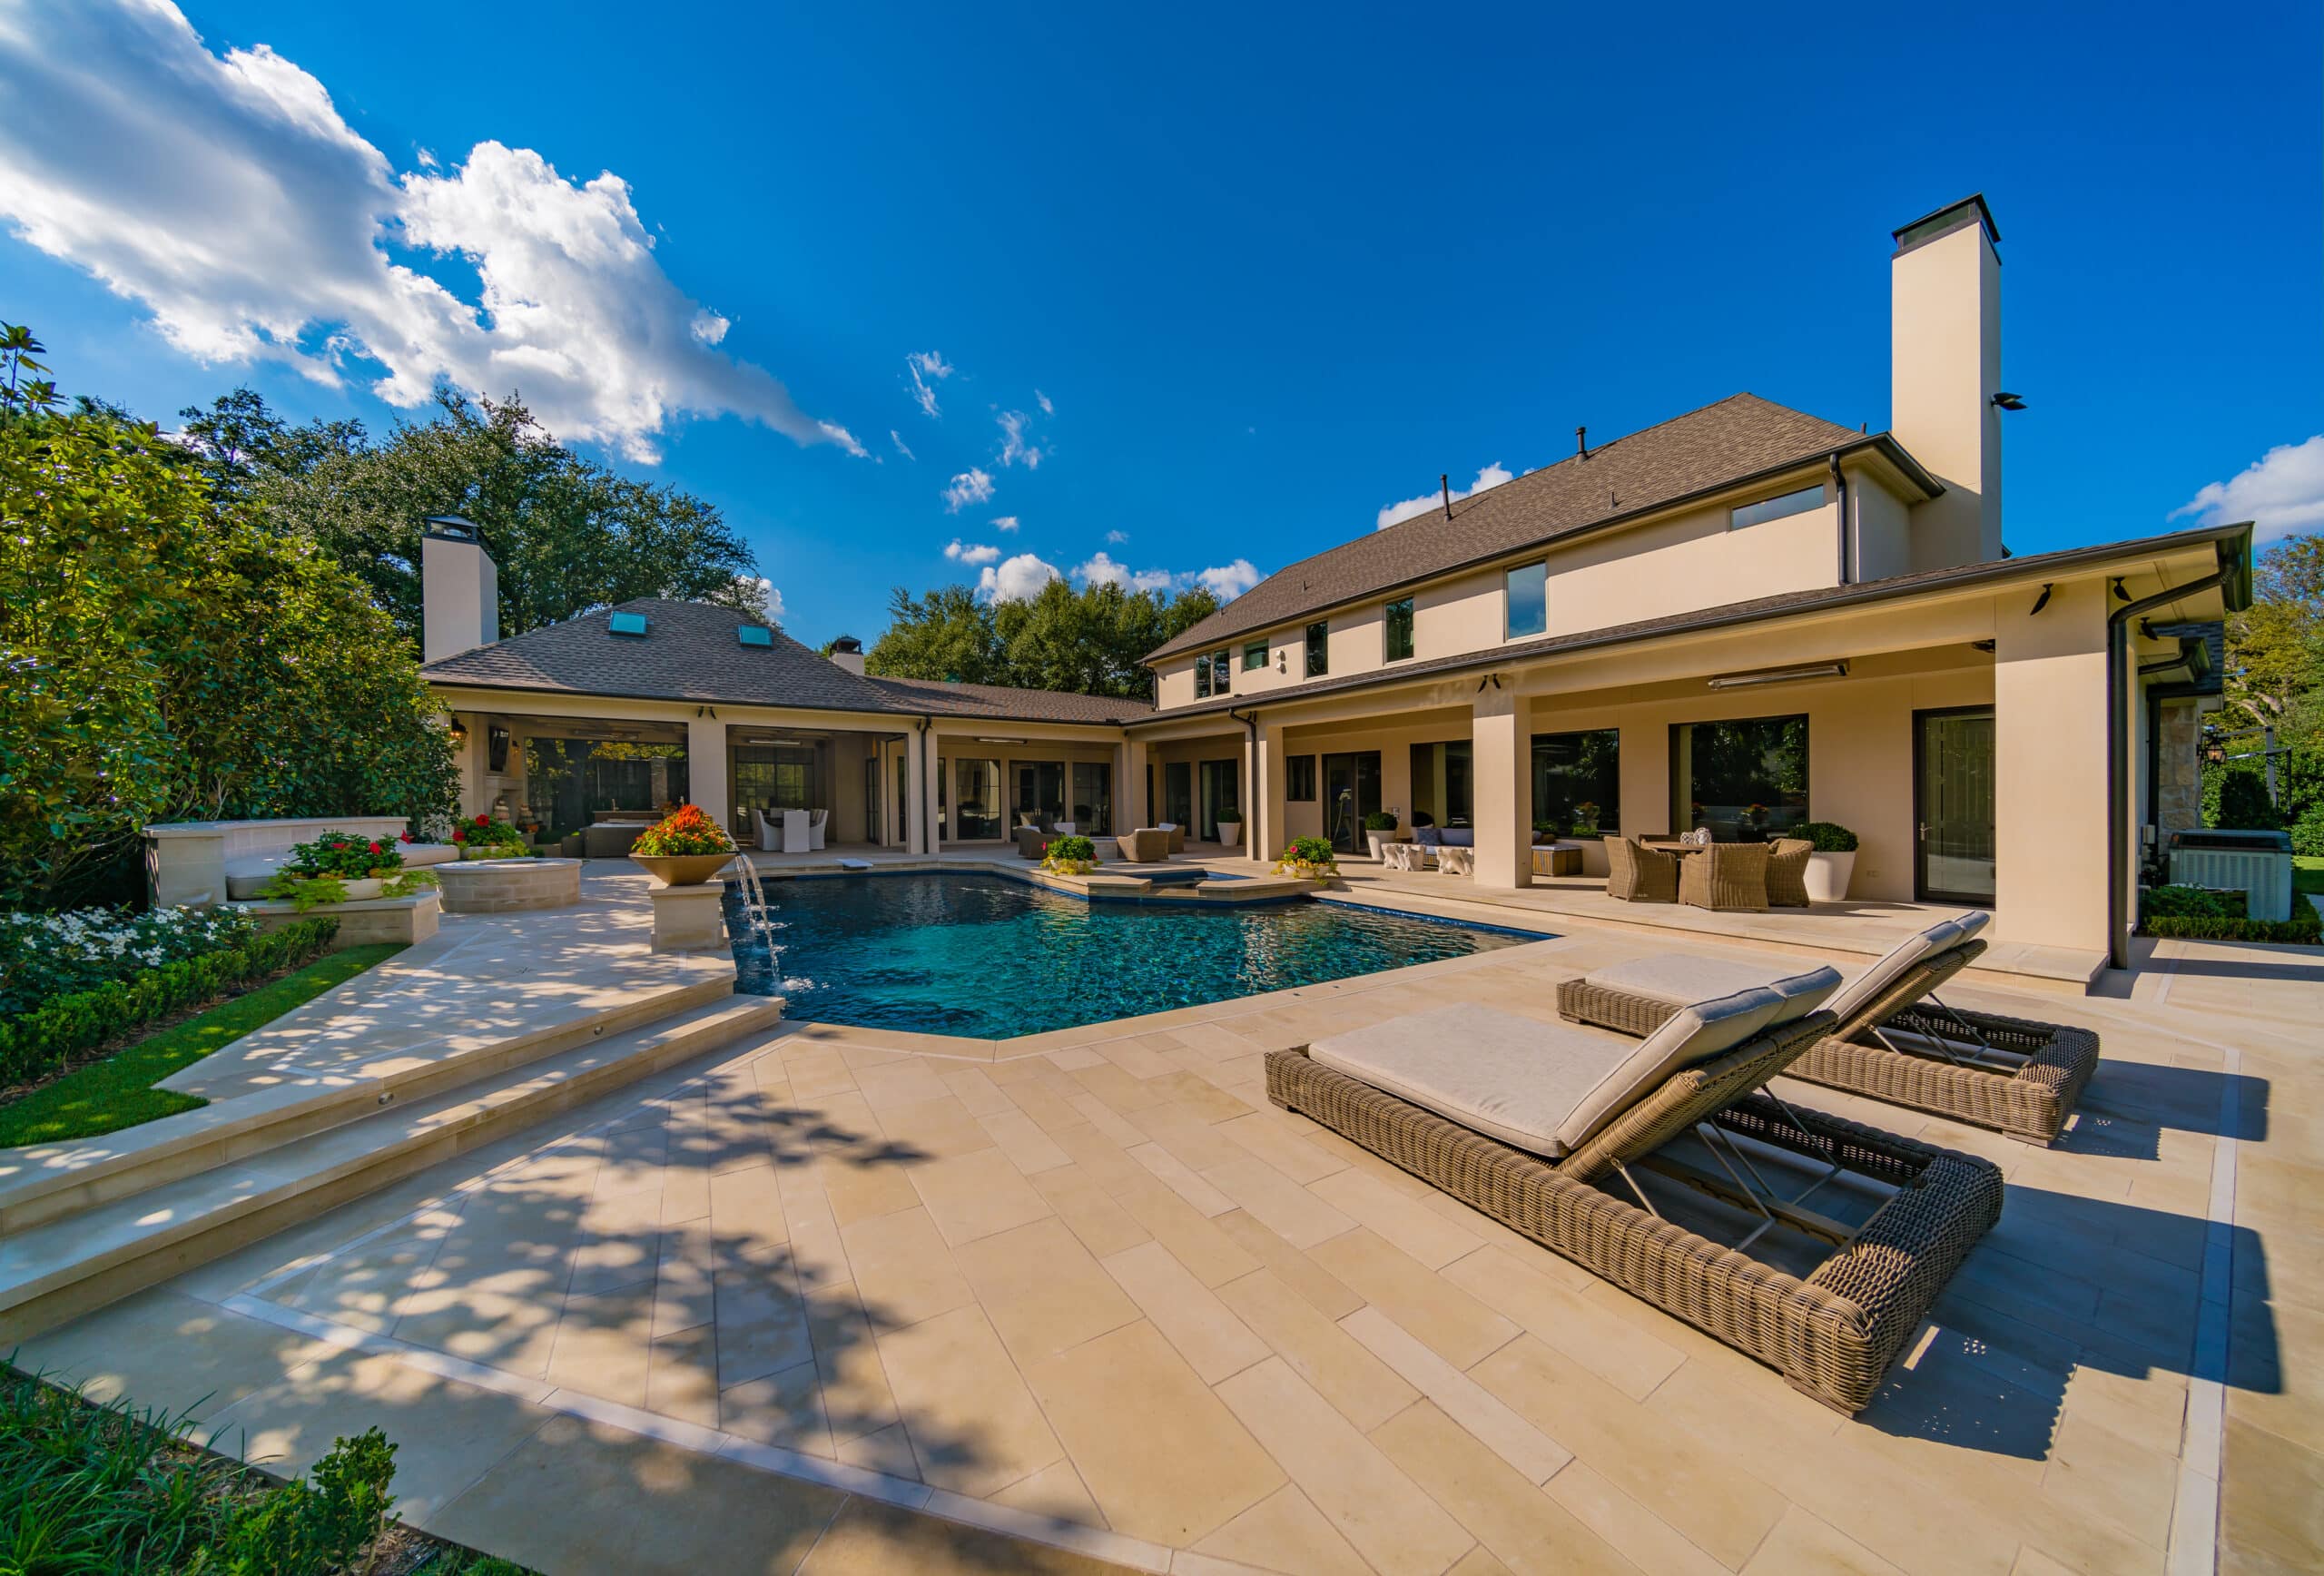 Custom pool and landscape architects in dallas